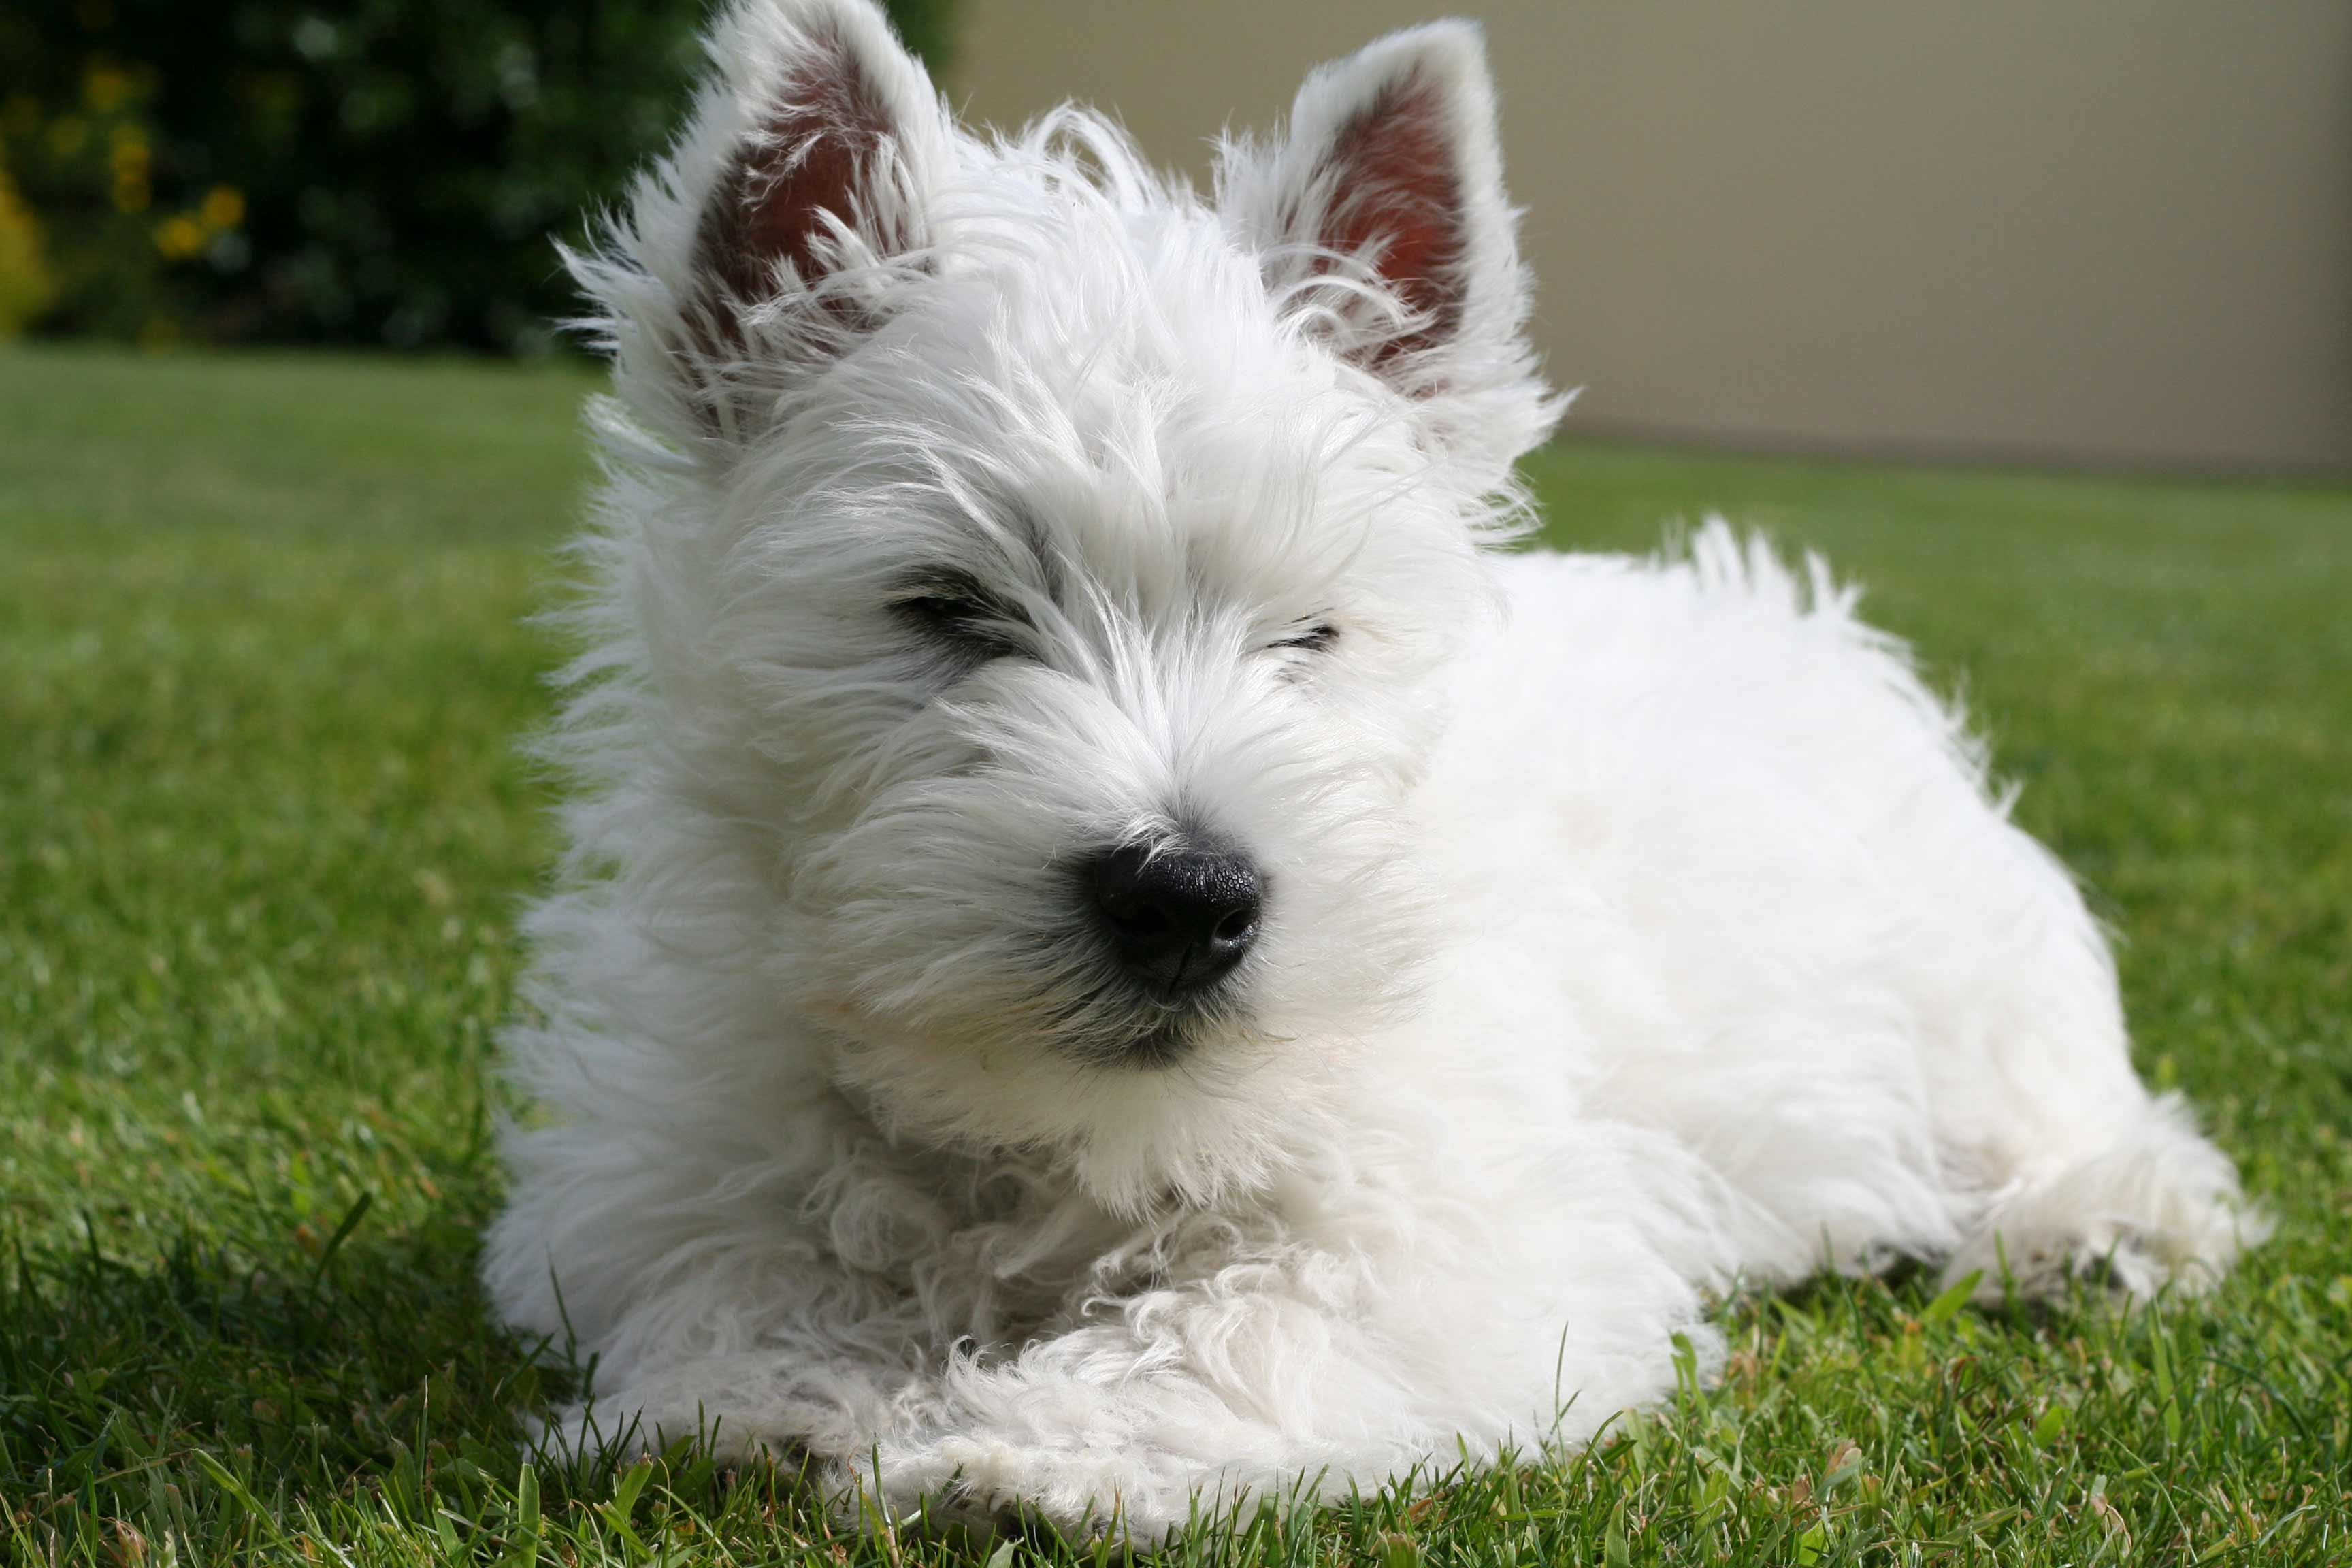 West Highland White Terrier Dog Breed » Info, Pic, & More